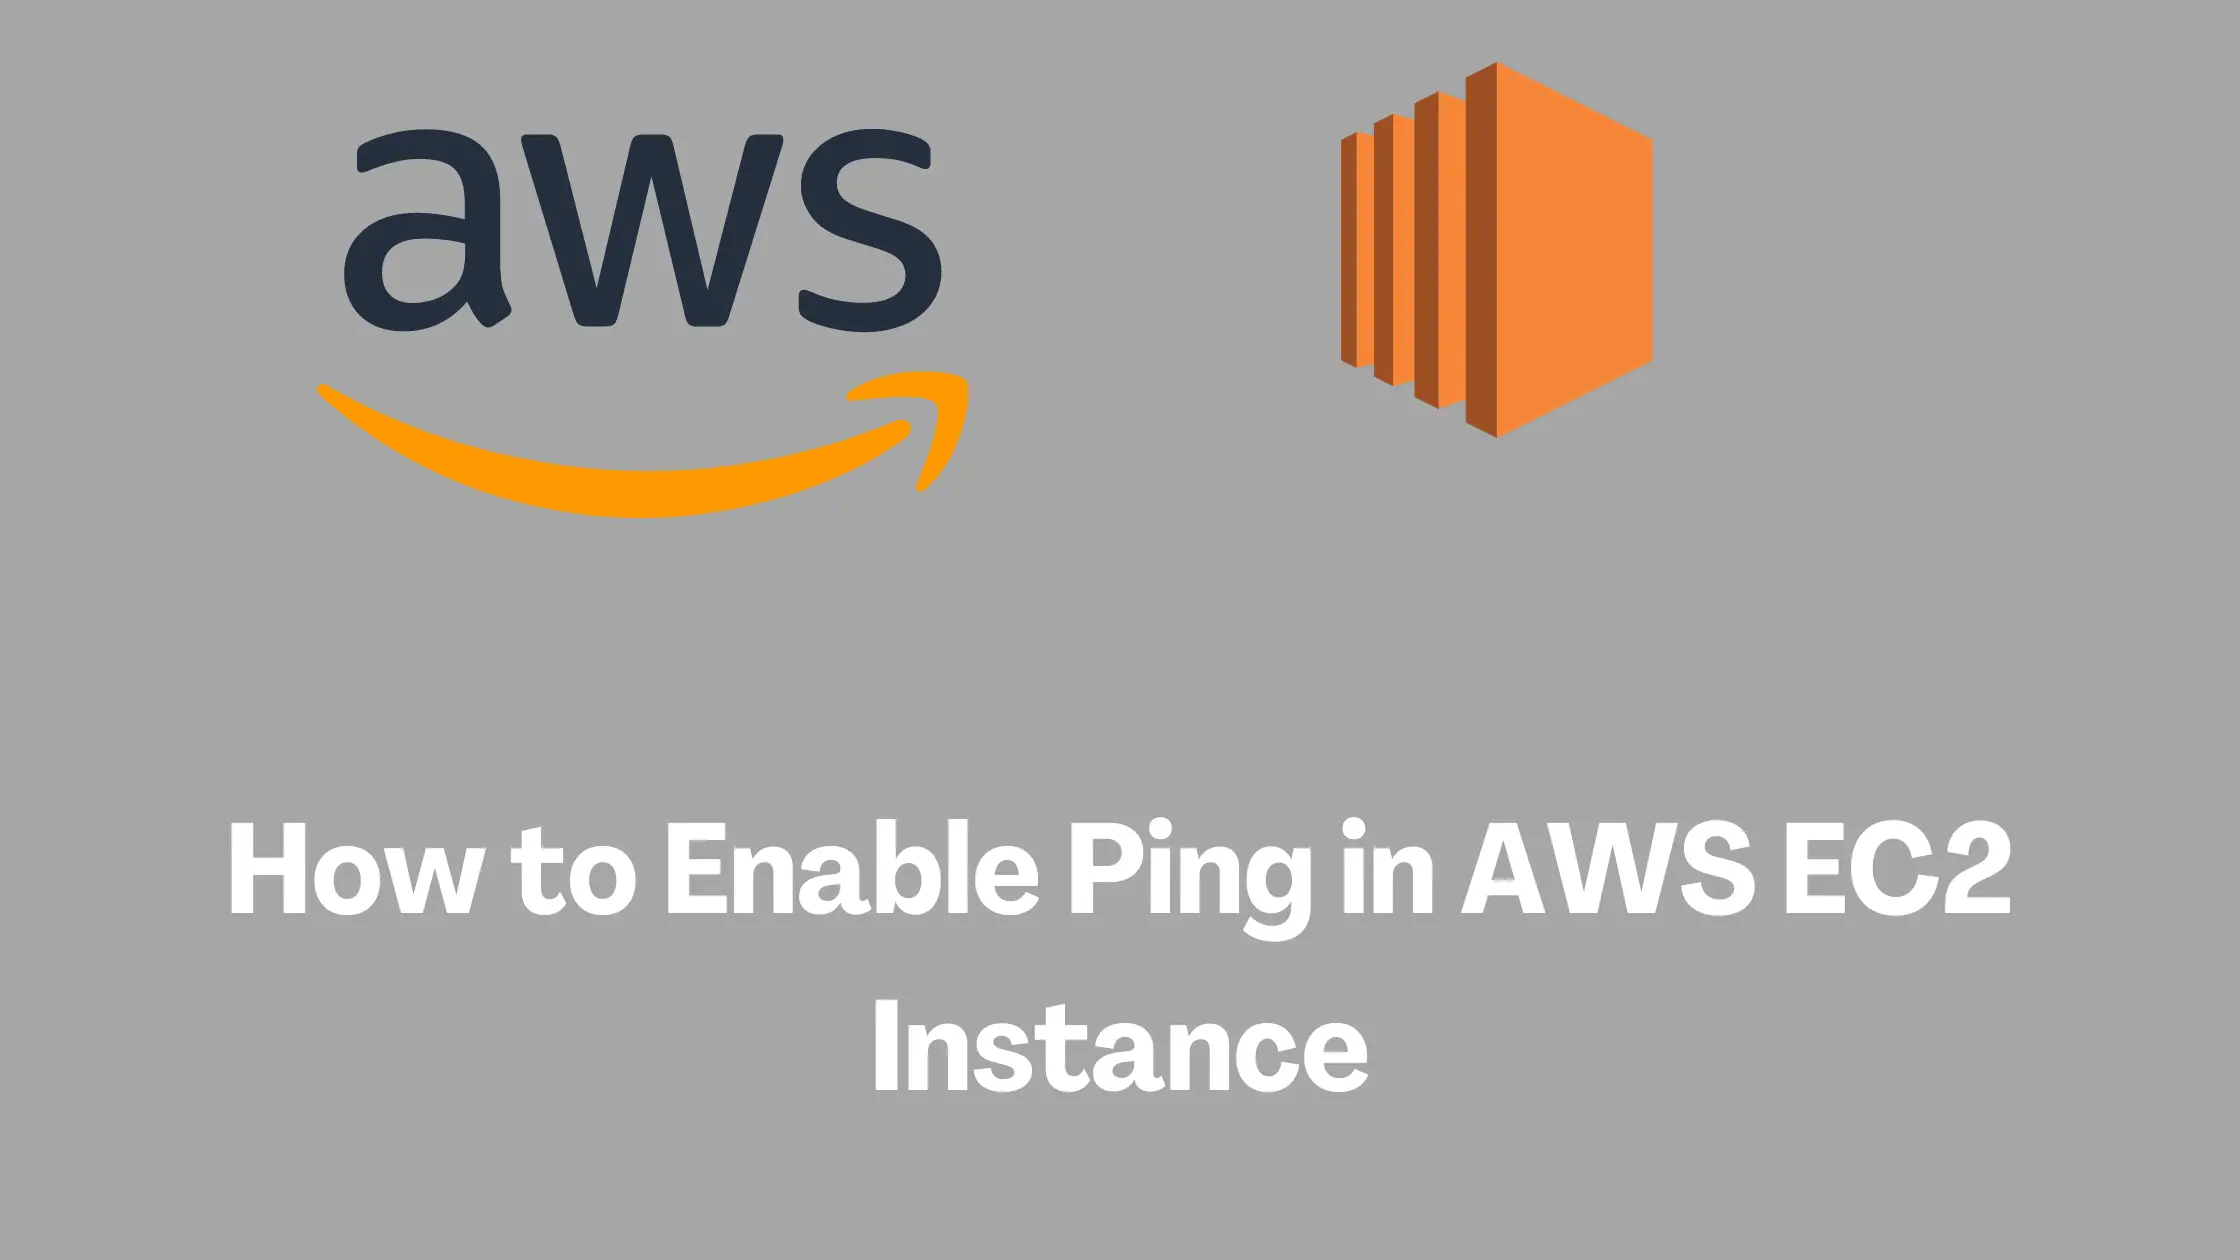 How to Enable Ping in AWS EC2 Instance